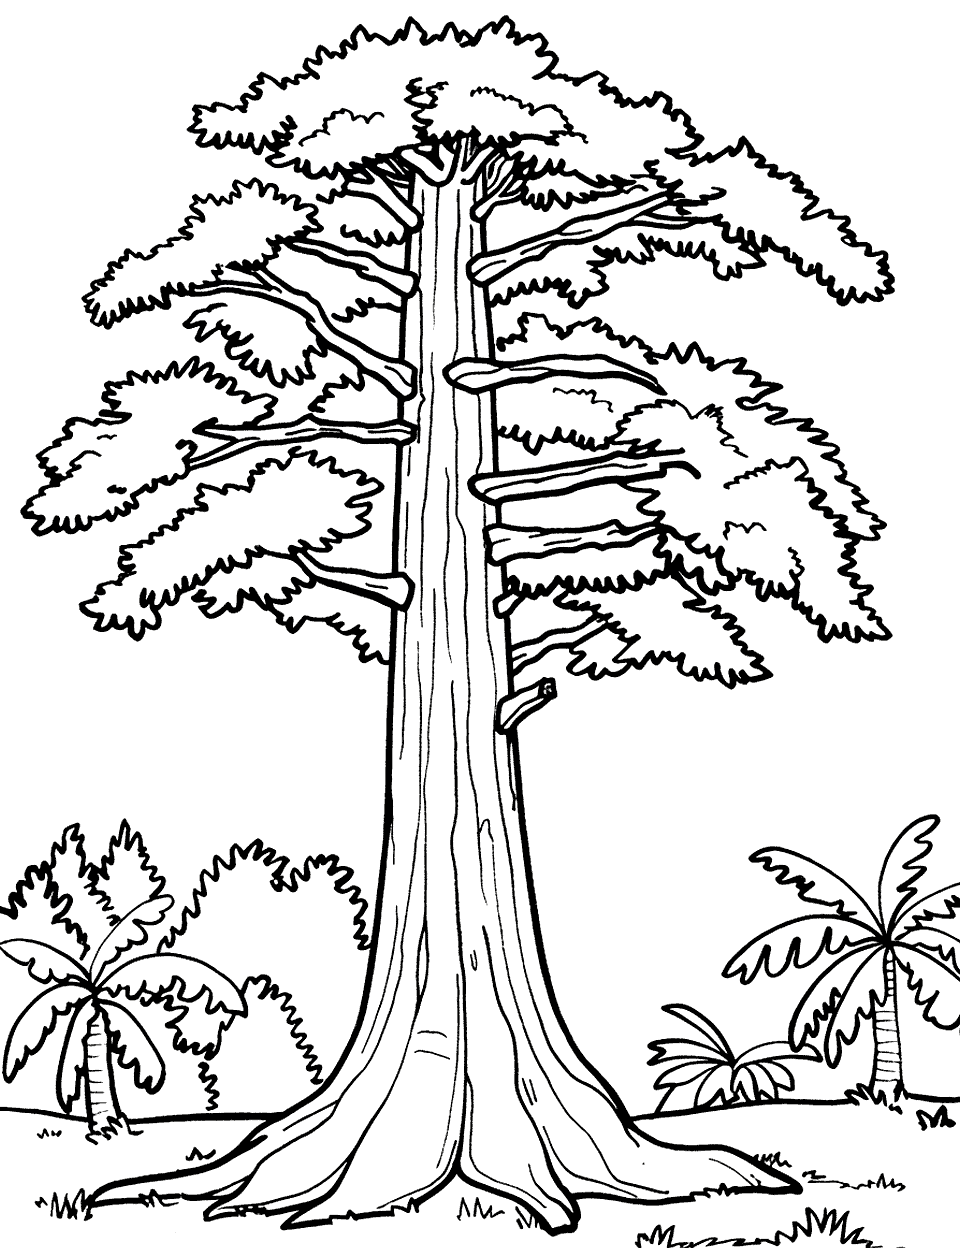 Giant Sequoia Coloring Page - An enormous sequoia tree towering over the forest floor.